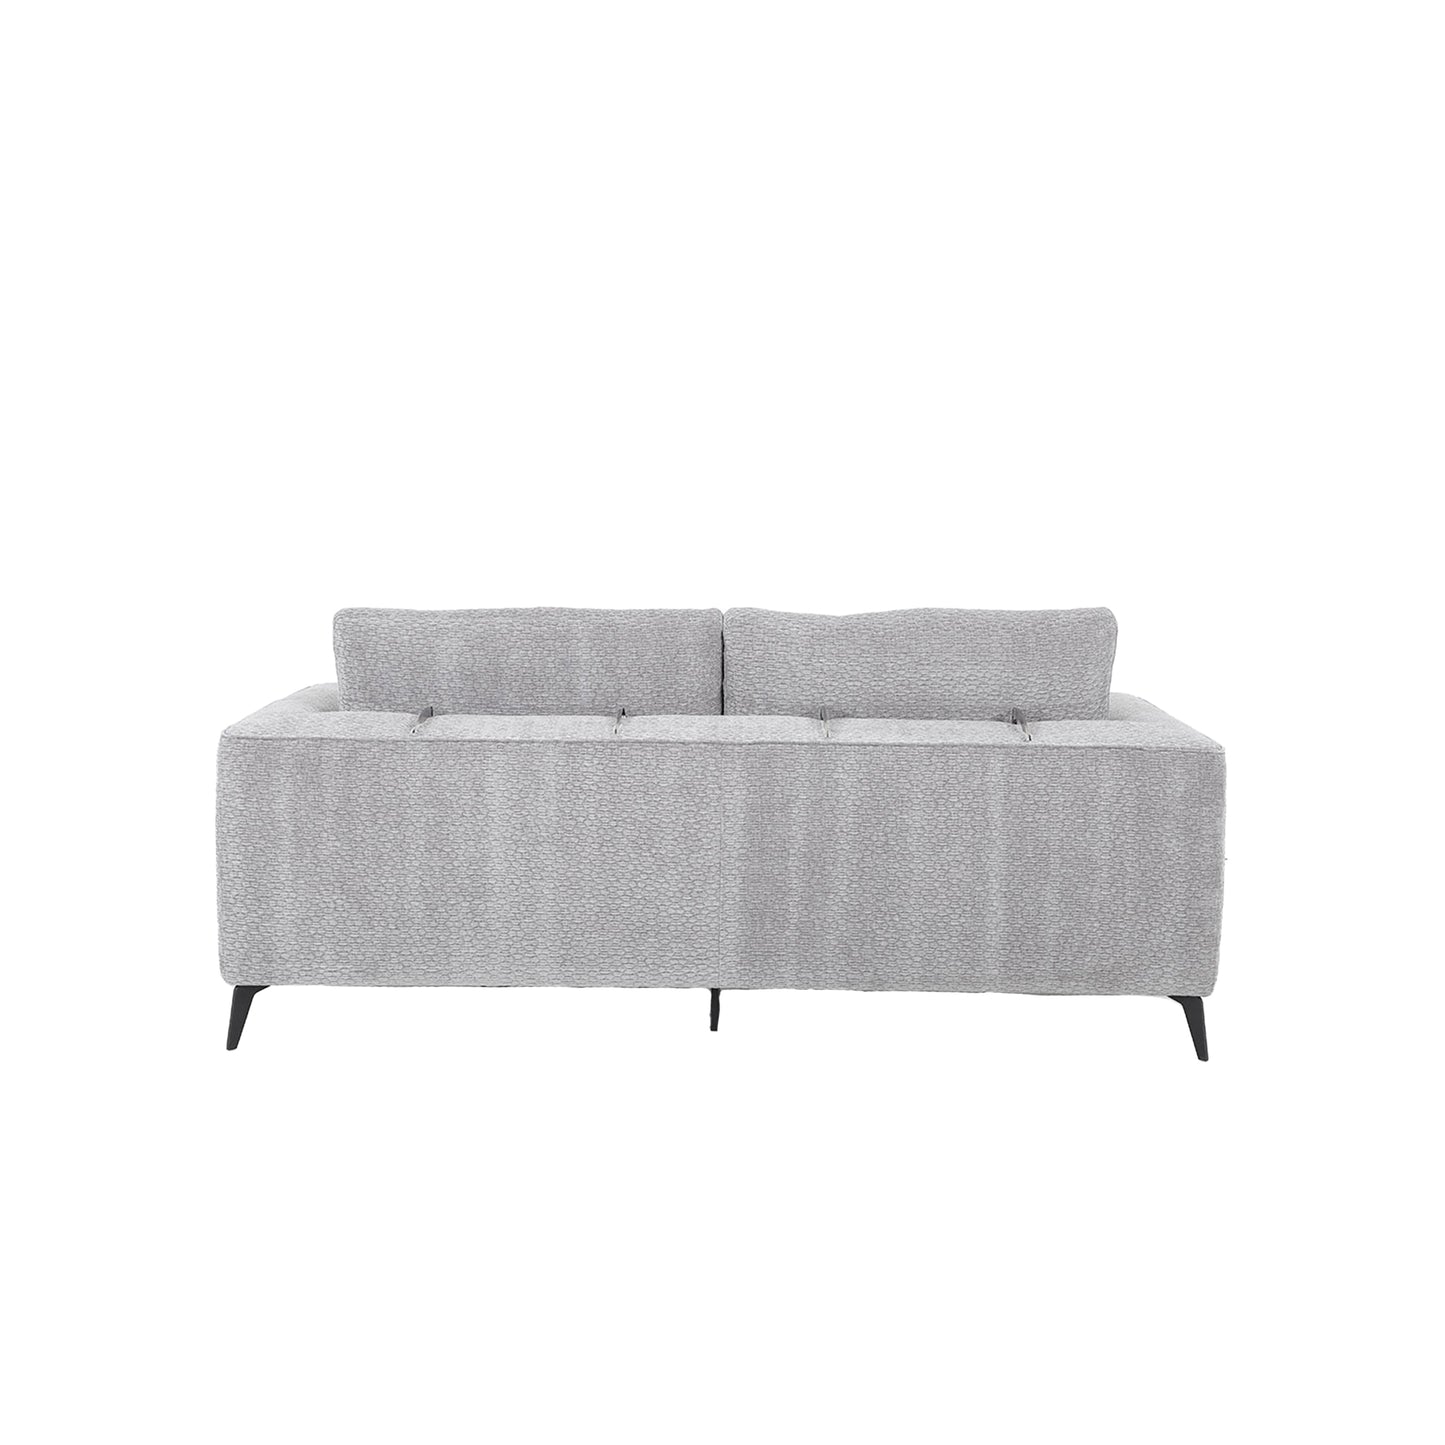 THE PRICE IS RIGHT: Louis 2.5 Seater Stationary Fabric or Leather Sofa - Custom Order